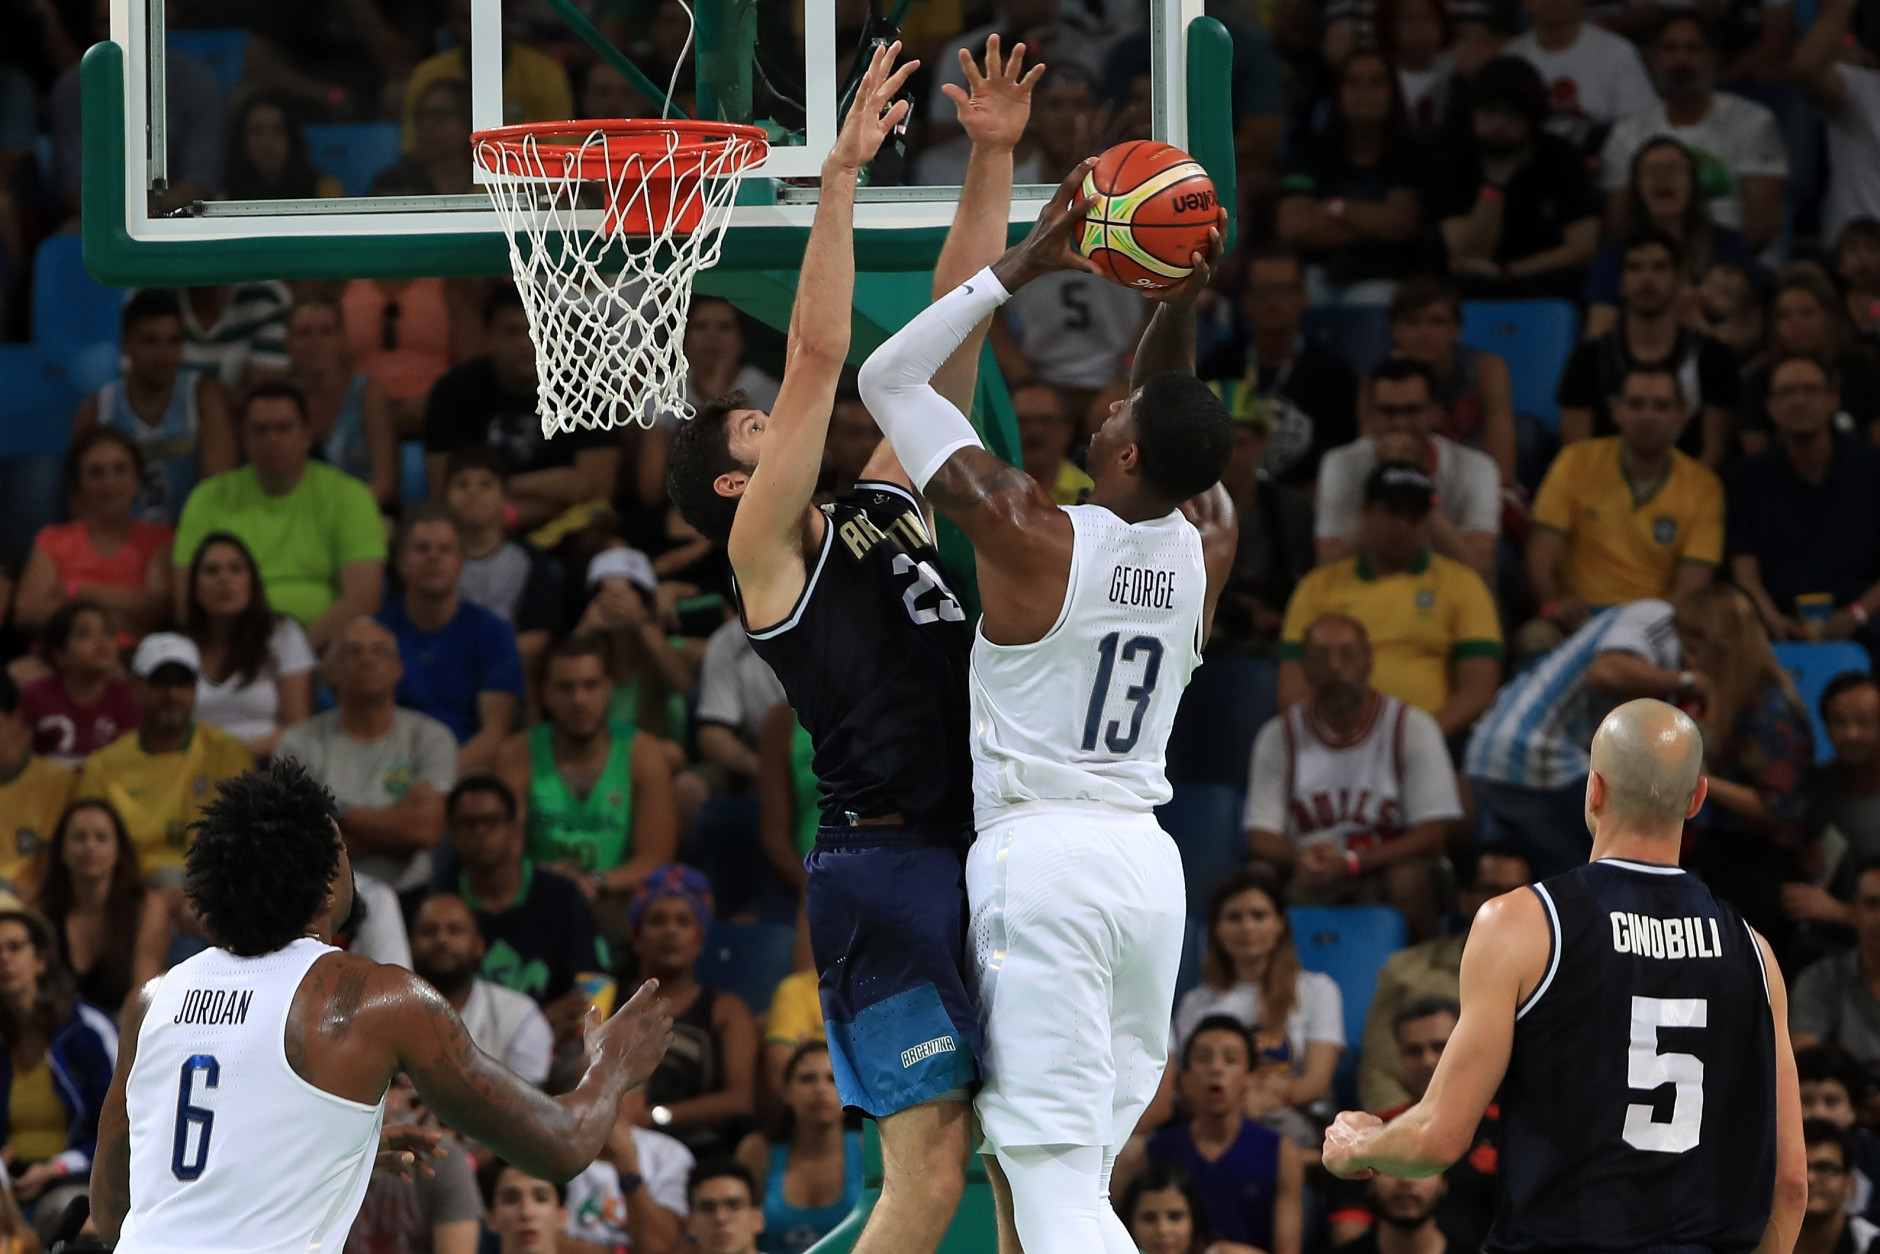 RIO DE JANEIRO, BRAZIL - AUGUST 17:  Paul George #13 of United States shoots the ball over Patricio Garino #29 of Argentina during the Men's Quarterfinal match on Day 12 of the Rio 2016 Olympic Games at Carioca Arena 1 on August 17, 2016 in Rio de Janeiro, Brazil.  (Photo by Sam Greenwood/Getty Images)